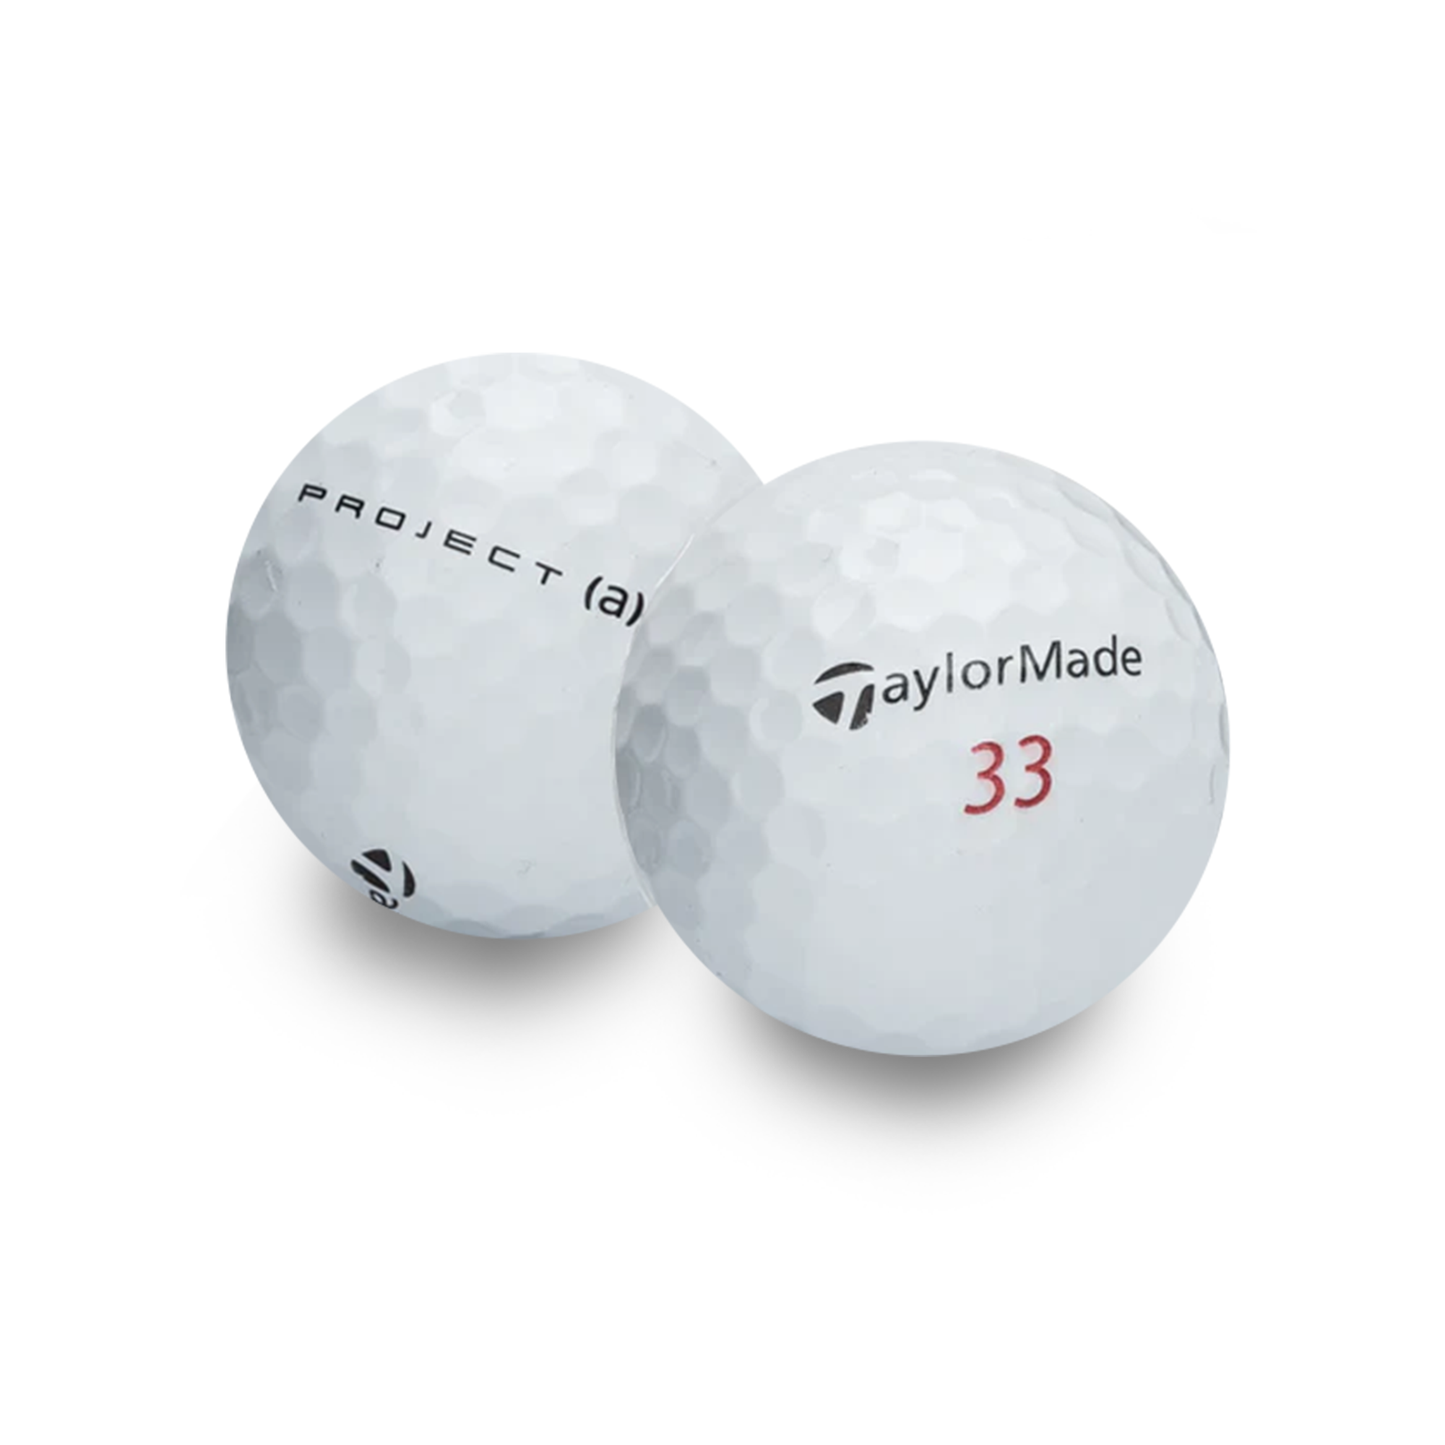 Used Taylormade Project A Golf Balls - 1 Dozen